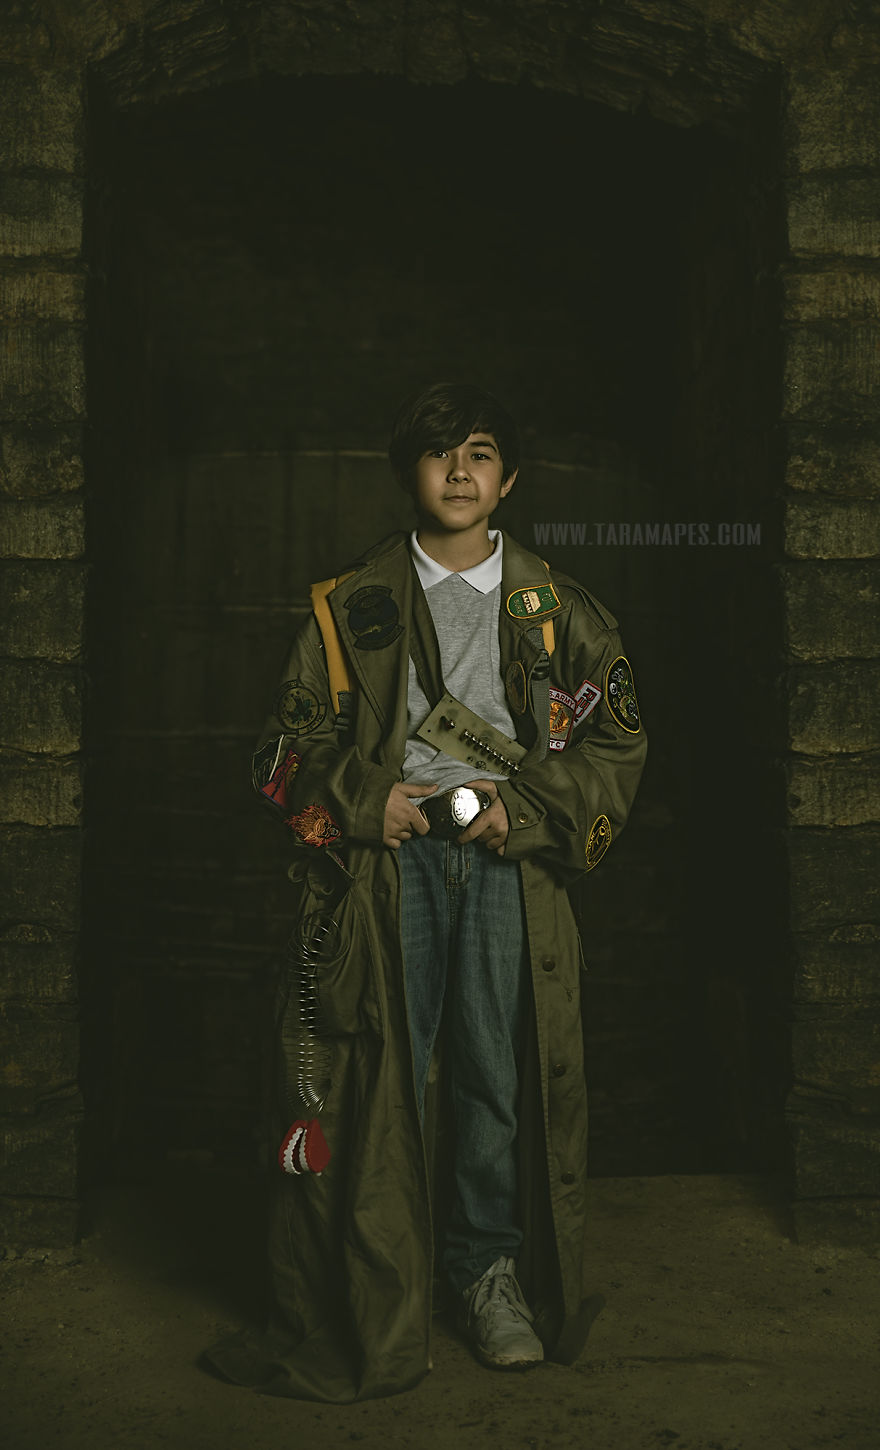 I Found An Underground Tunnel...so I Did A Goonies Photoshoot